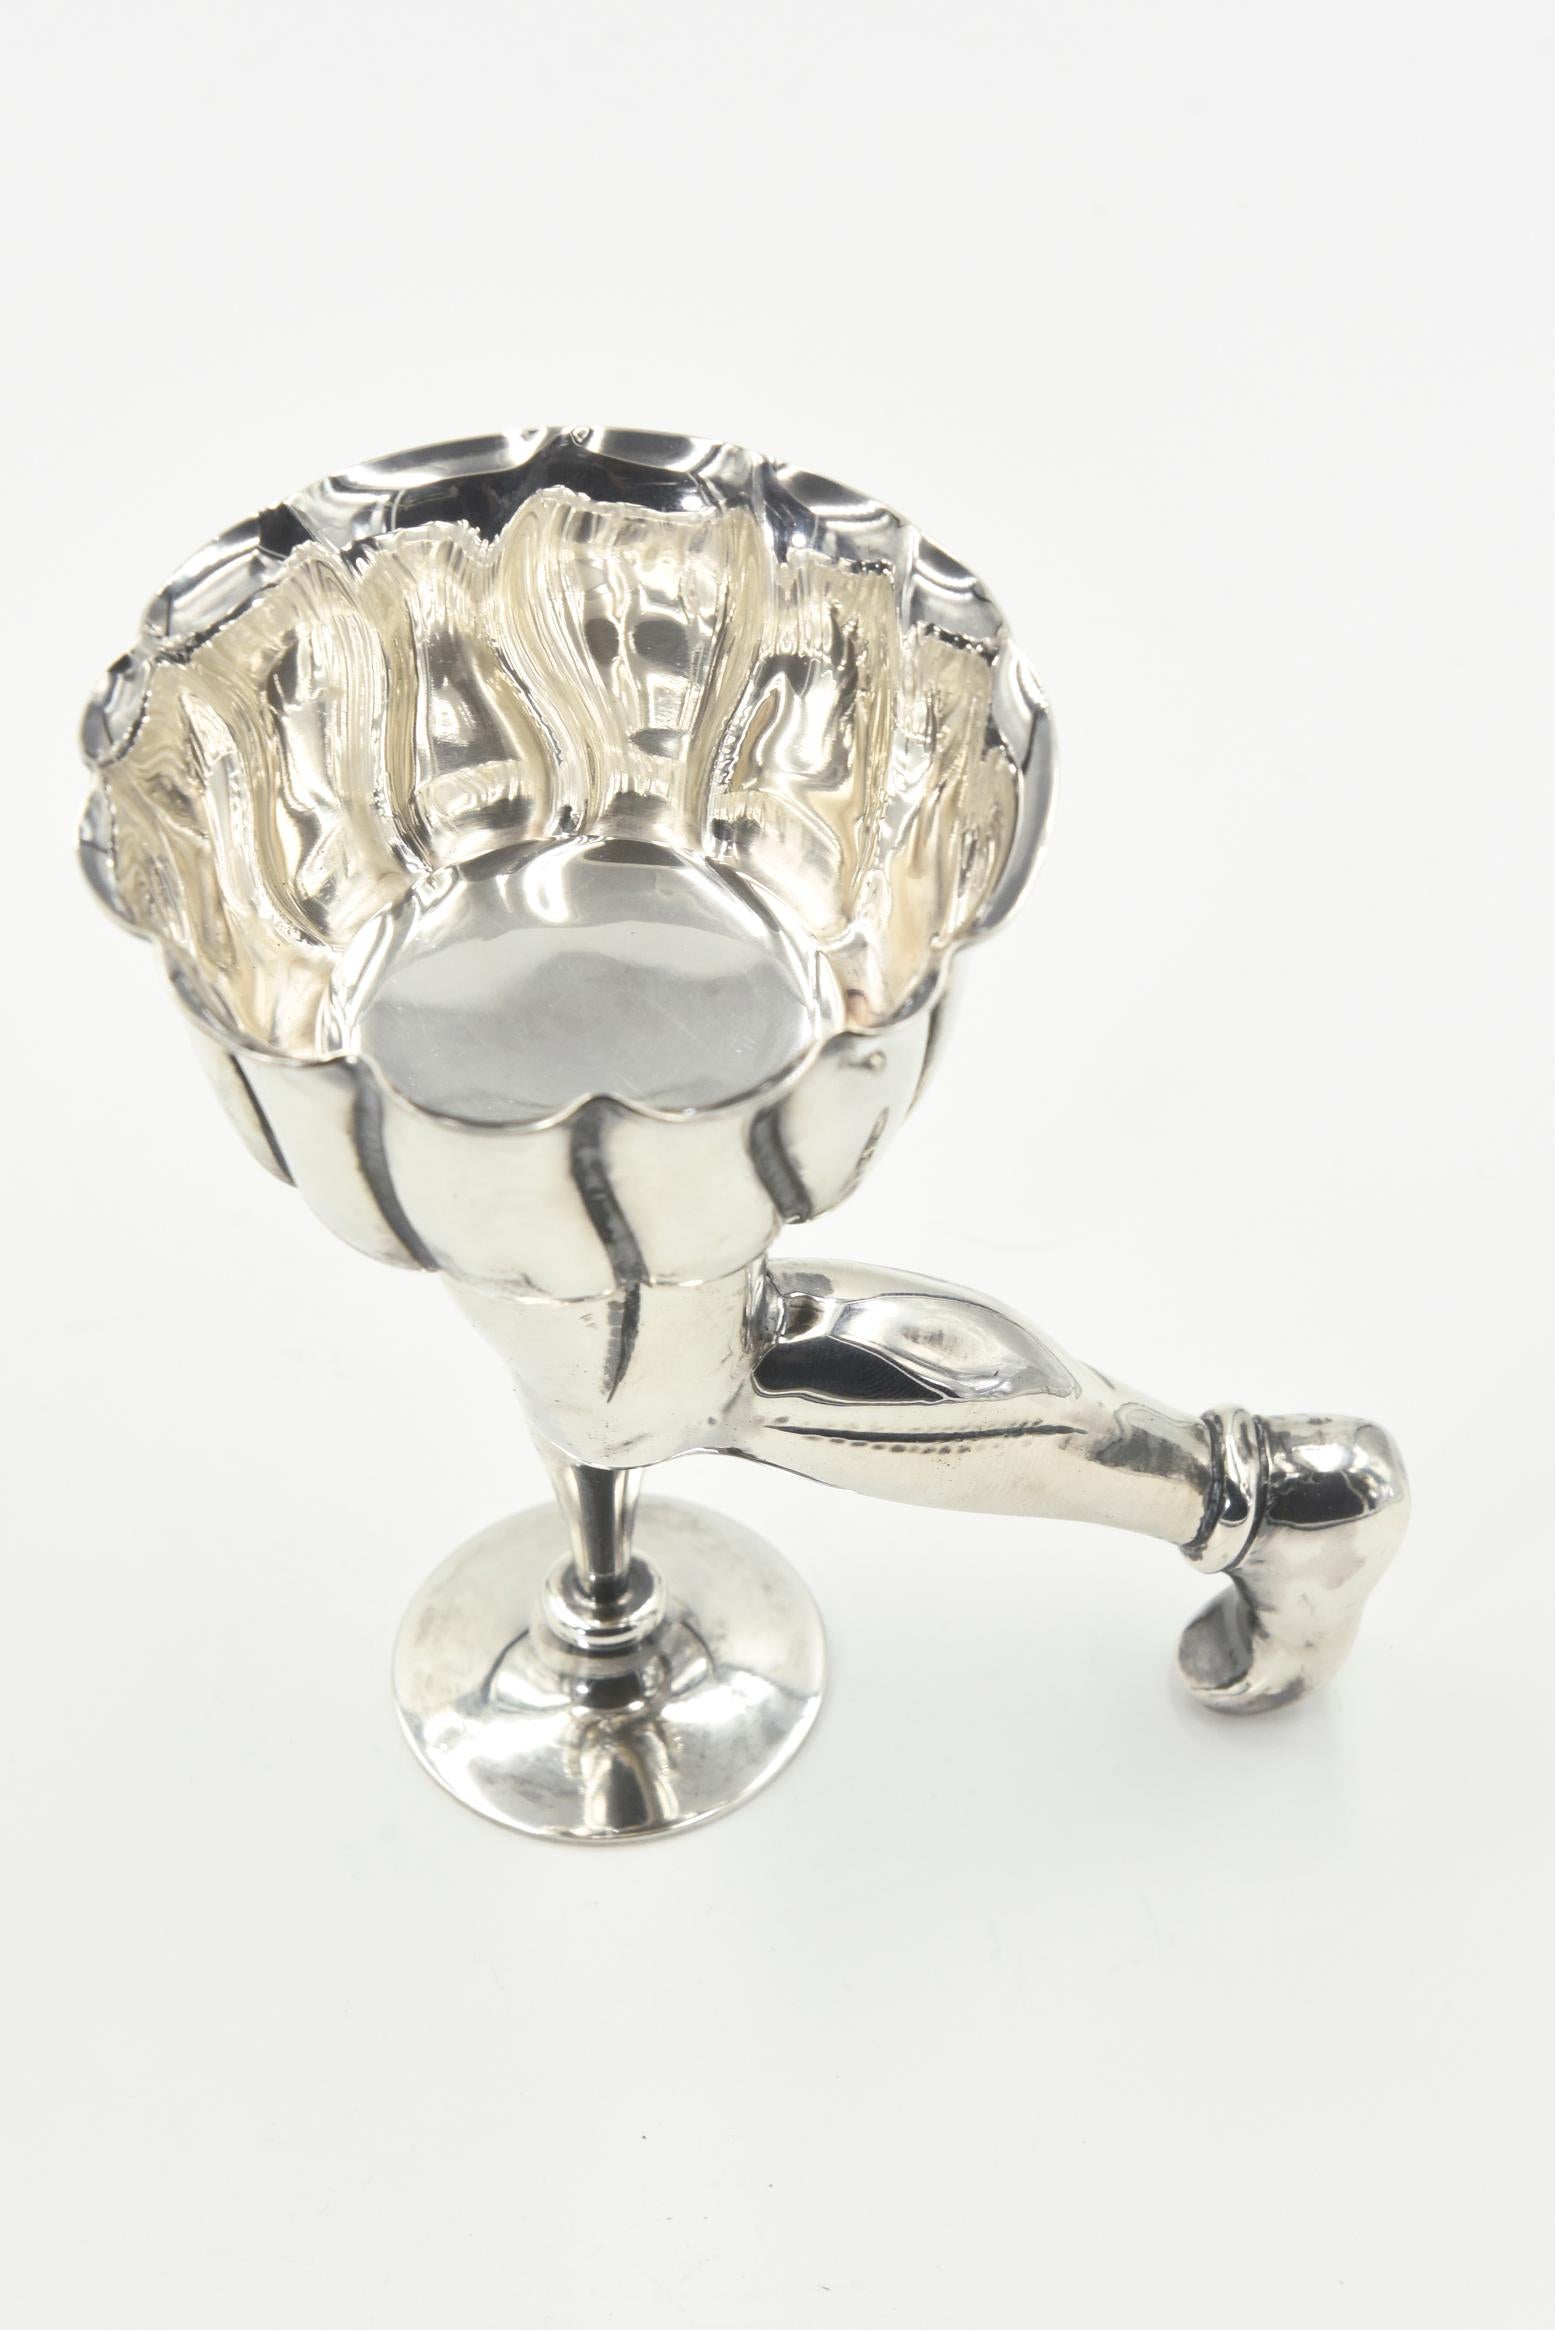 Rare Pampaloni Sterling Footed Figural Wine Cup from Bichierografia Collection 2